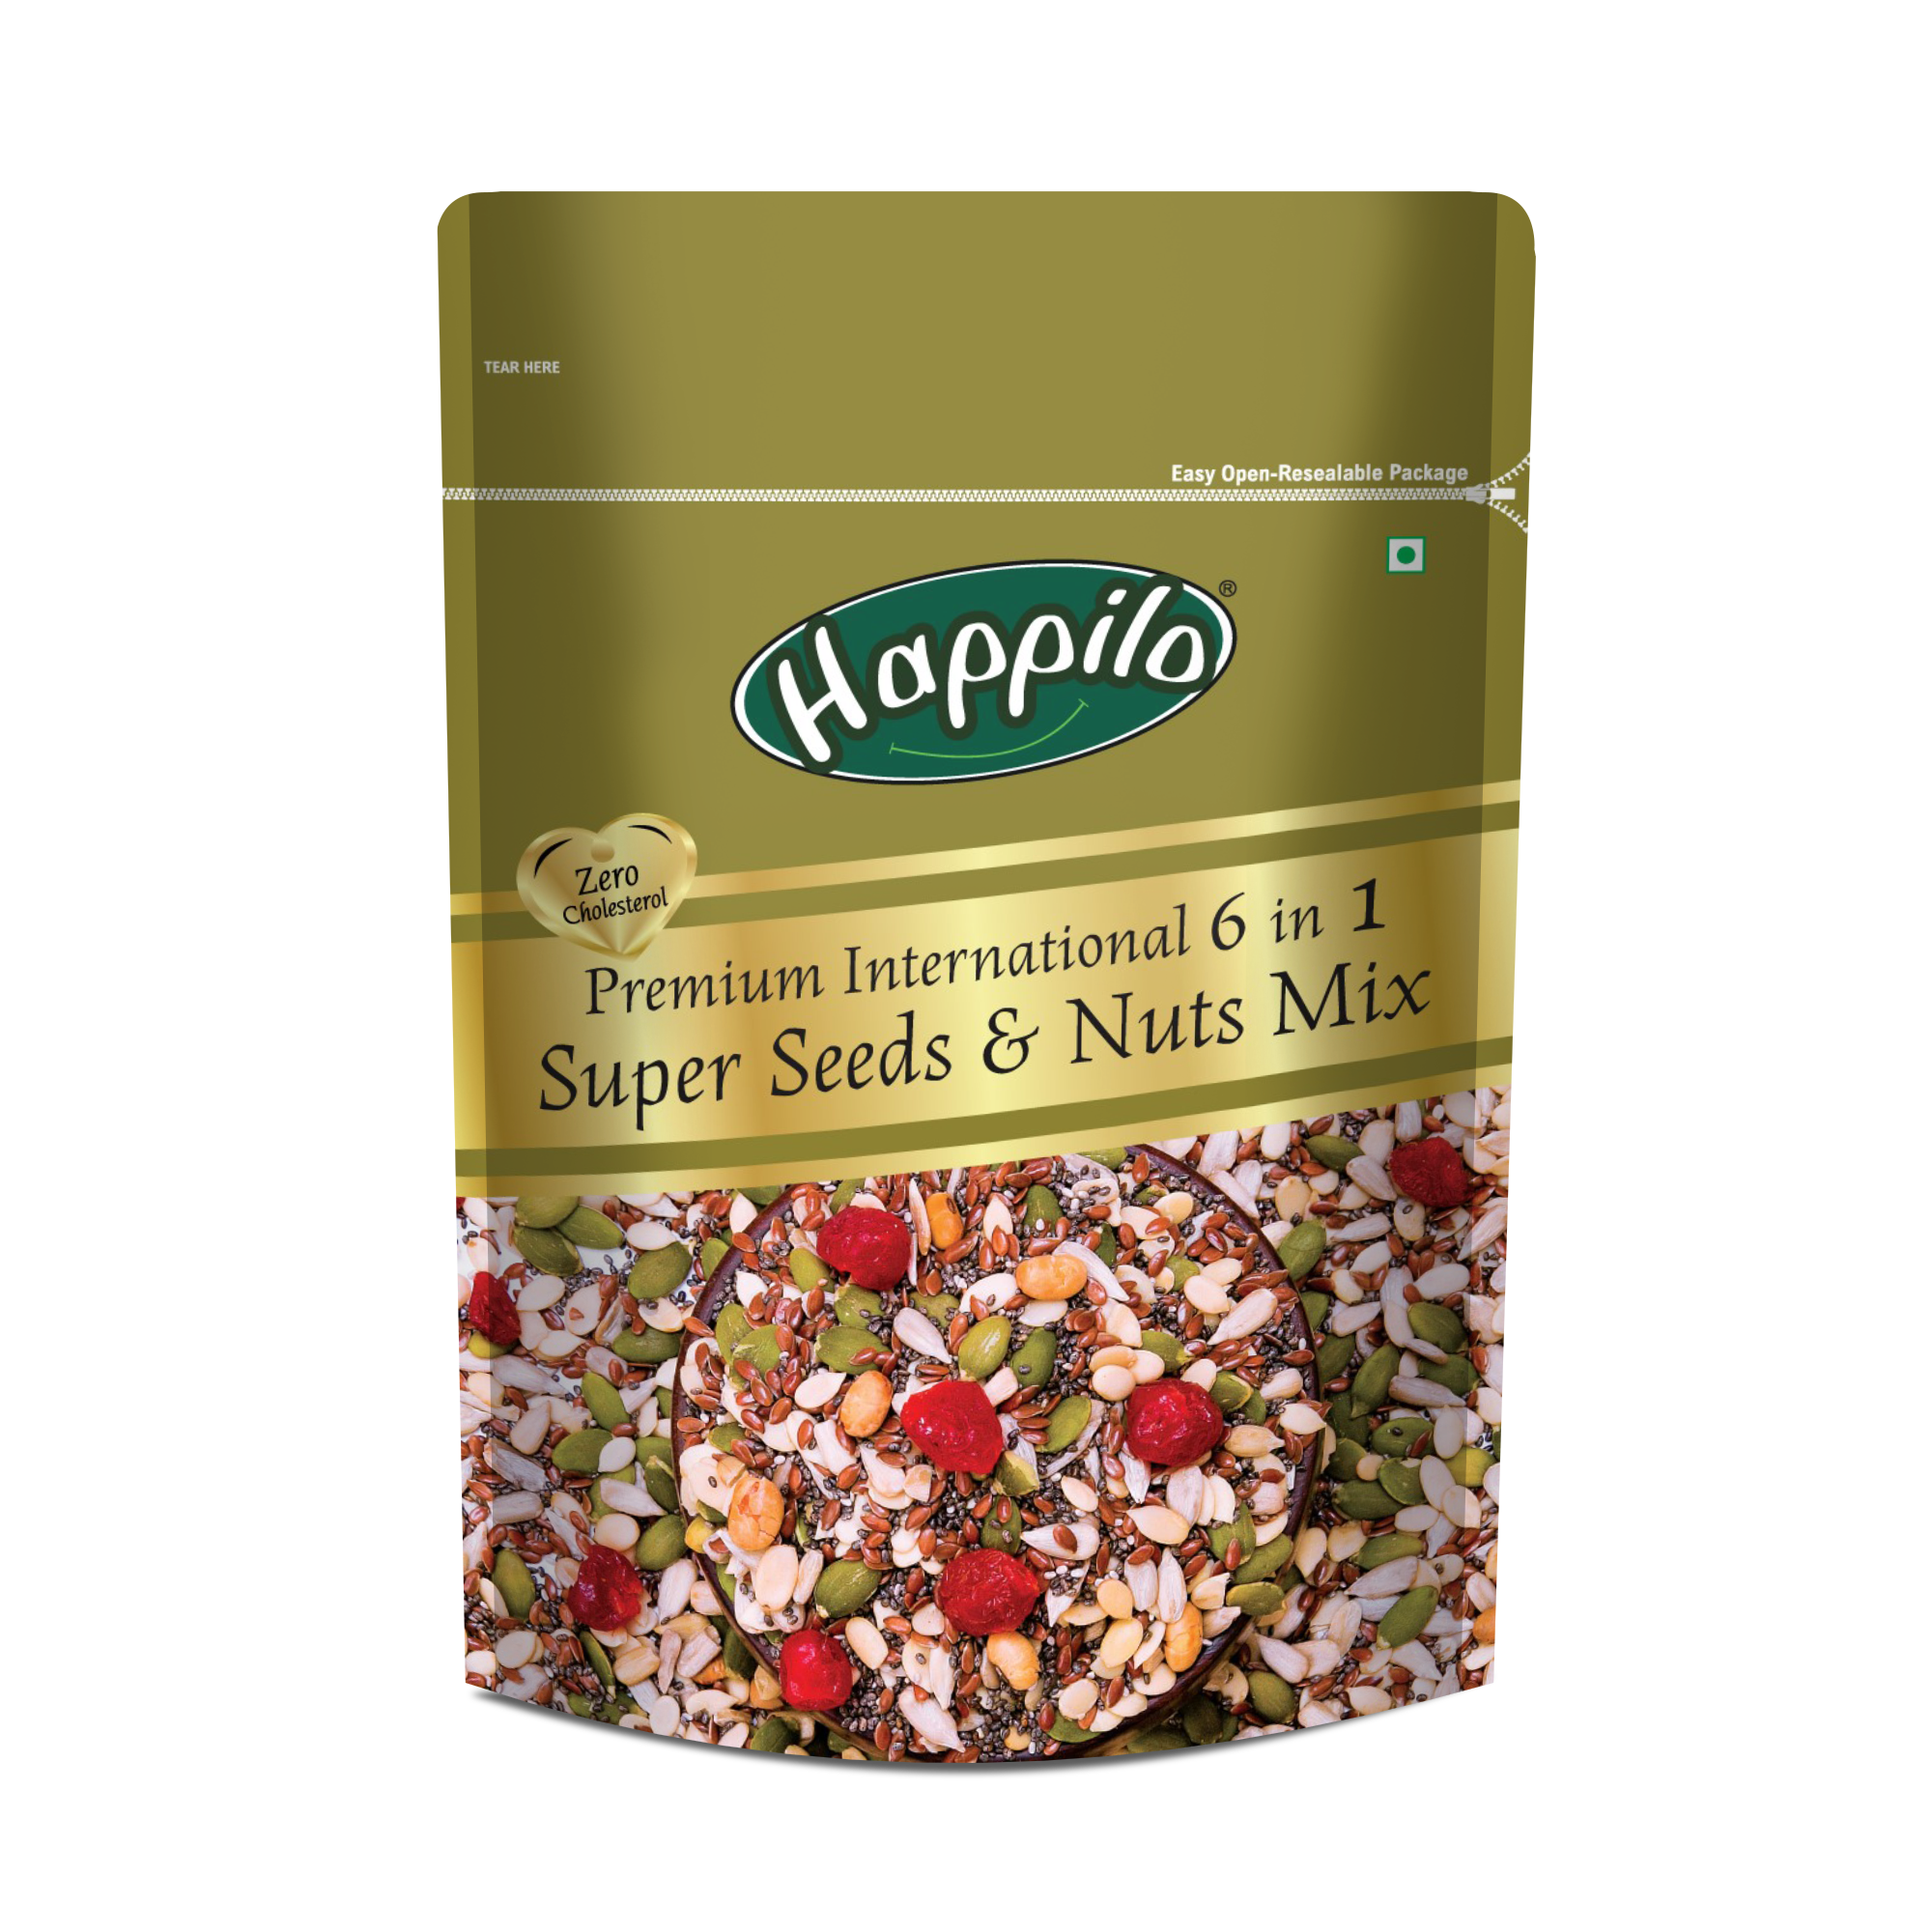 6 in 1 Super Seeds & Nuts Mix